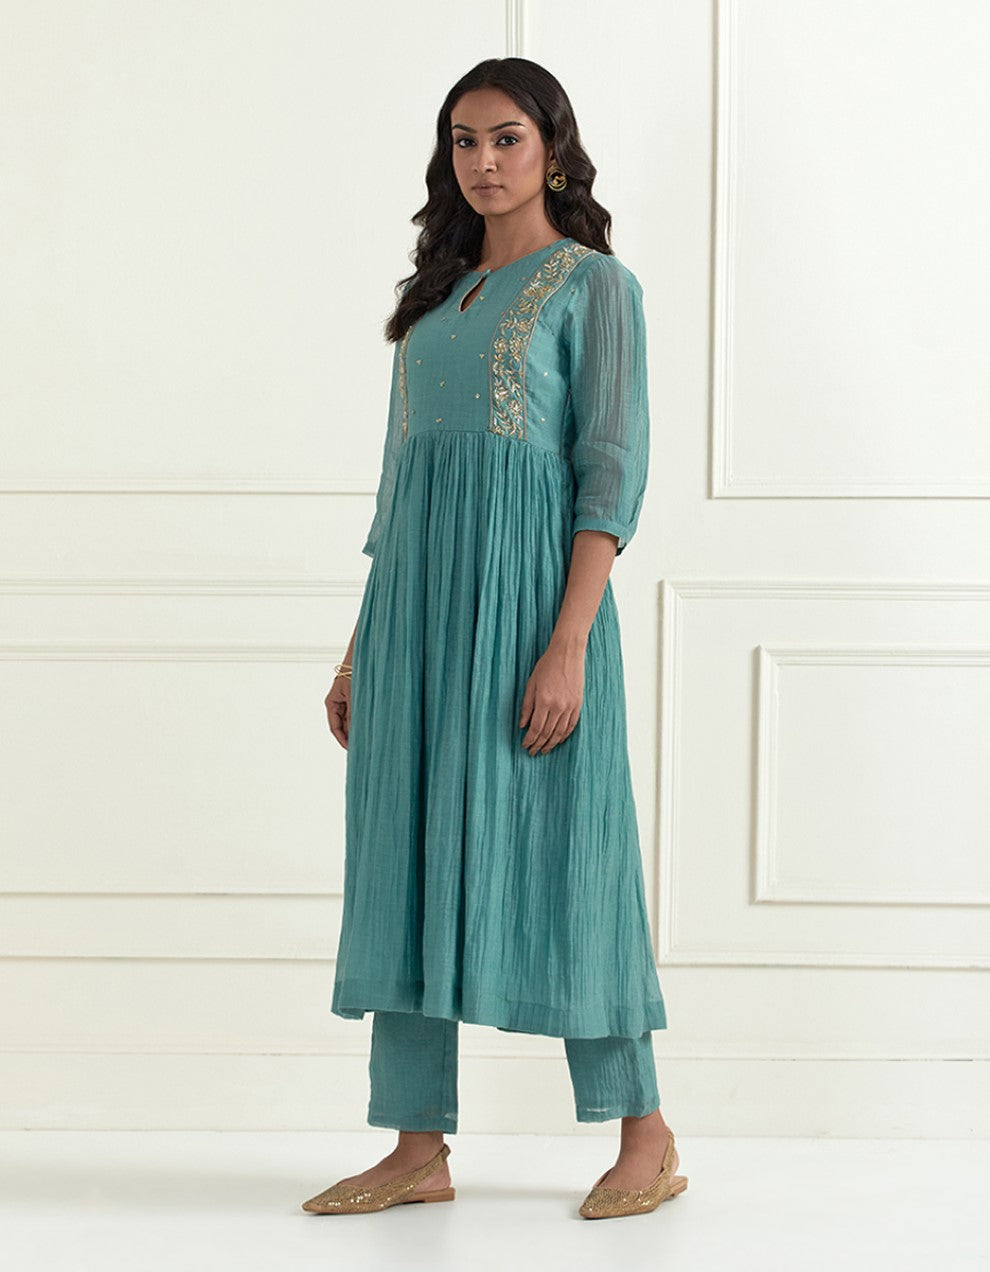 Teal blue hand embroidered kurta with pants and dupatta